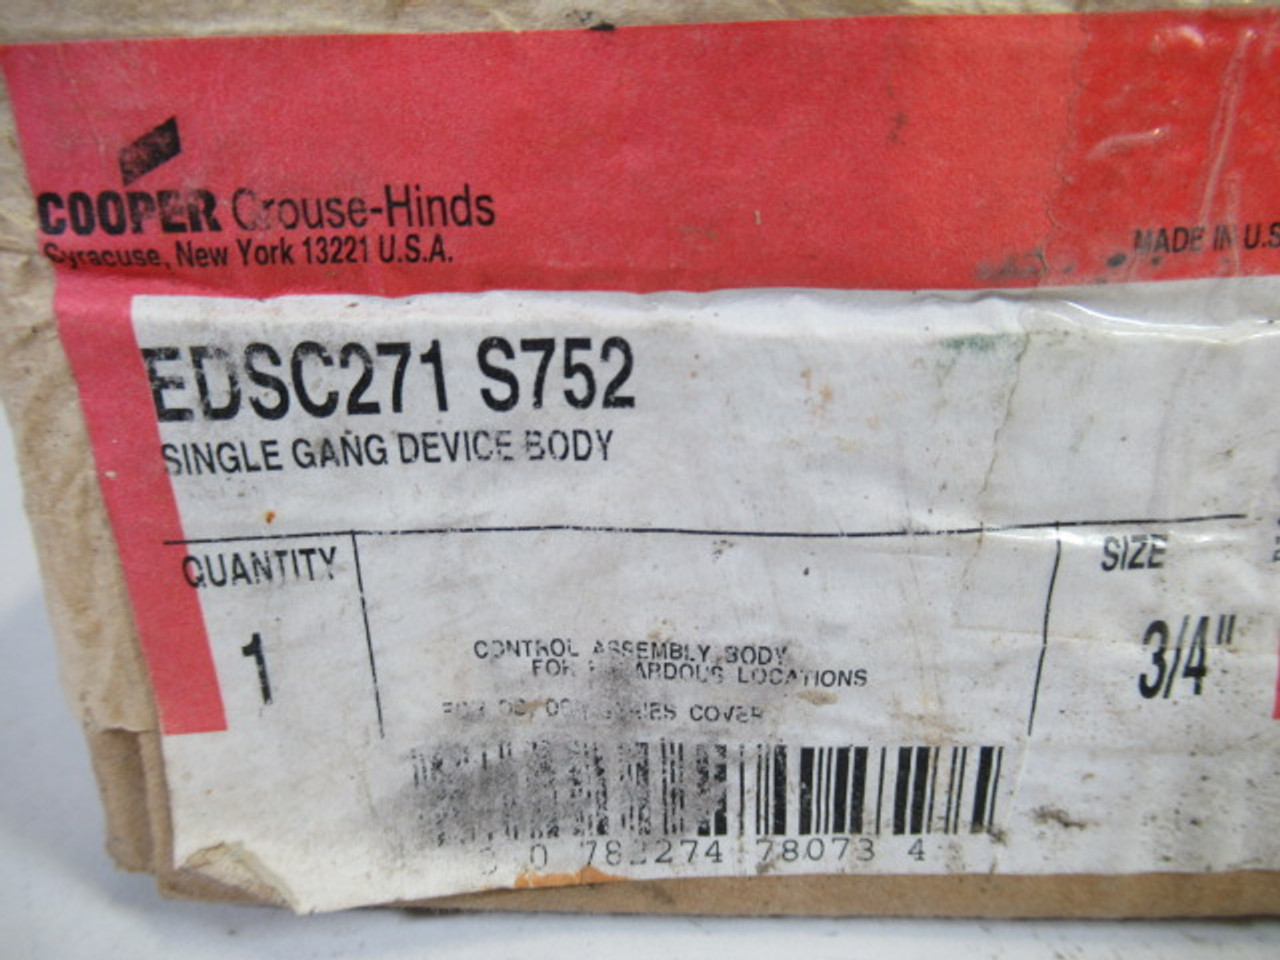 Crouse-Hinds EDSC271-S752 Cooper Single Gang Device Body *Sealed* 3/4" ! NEW !